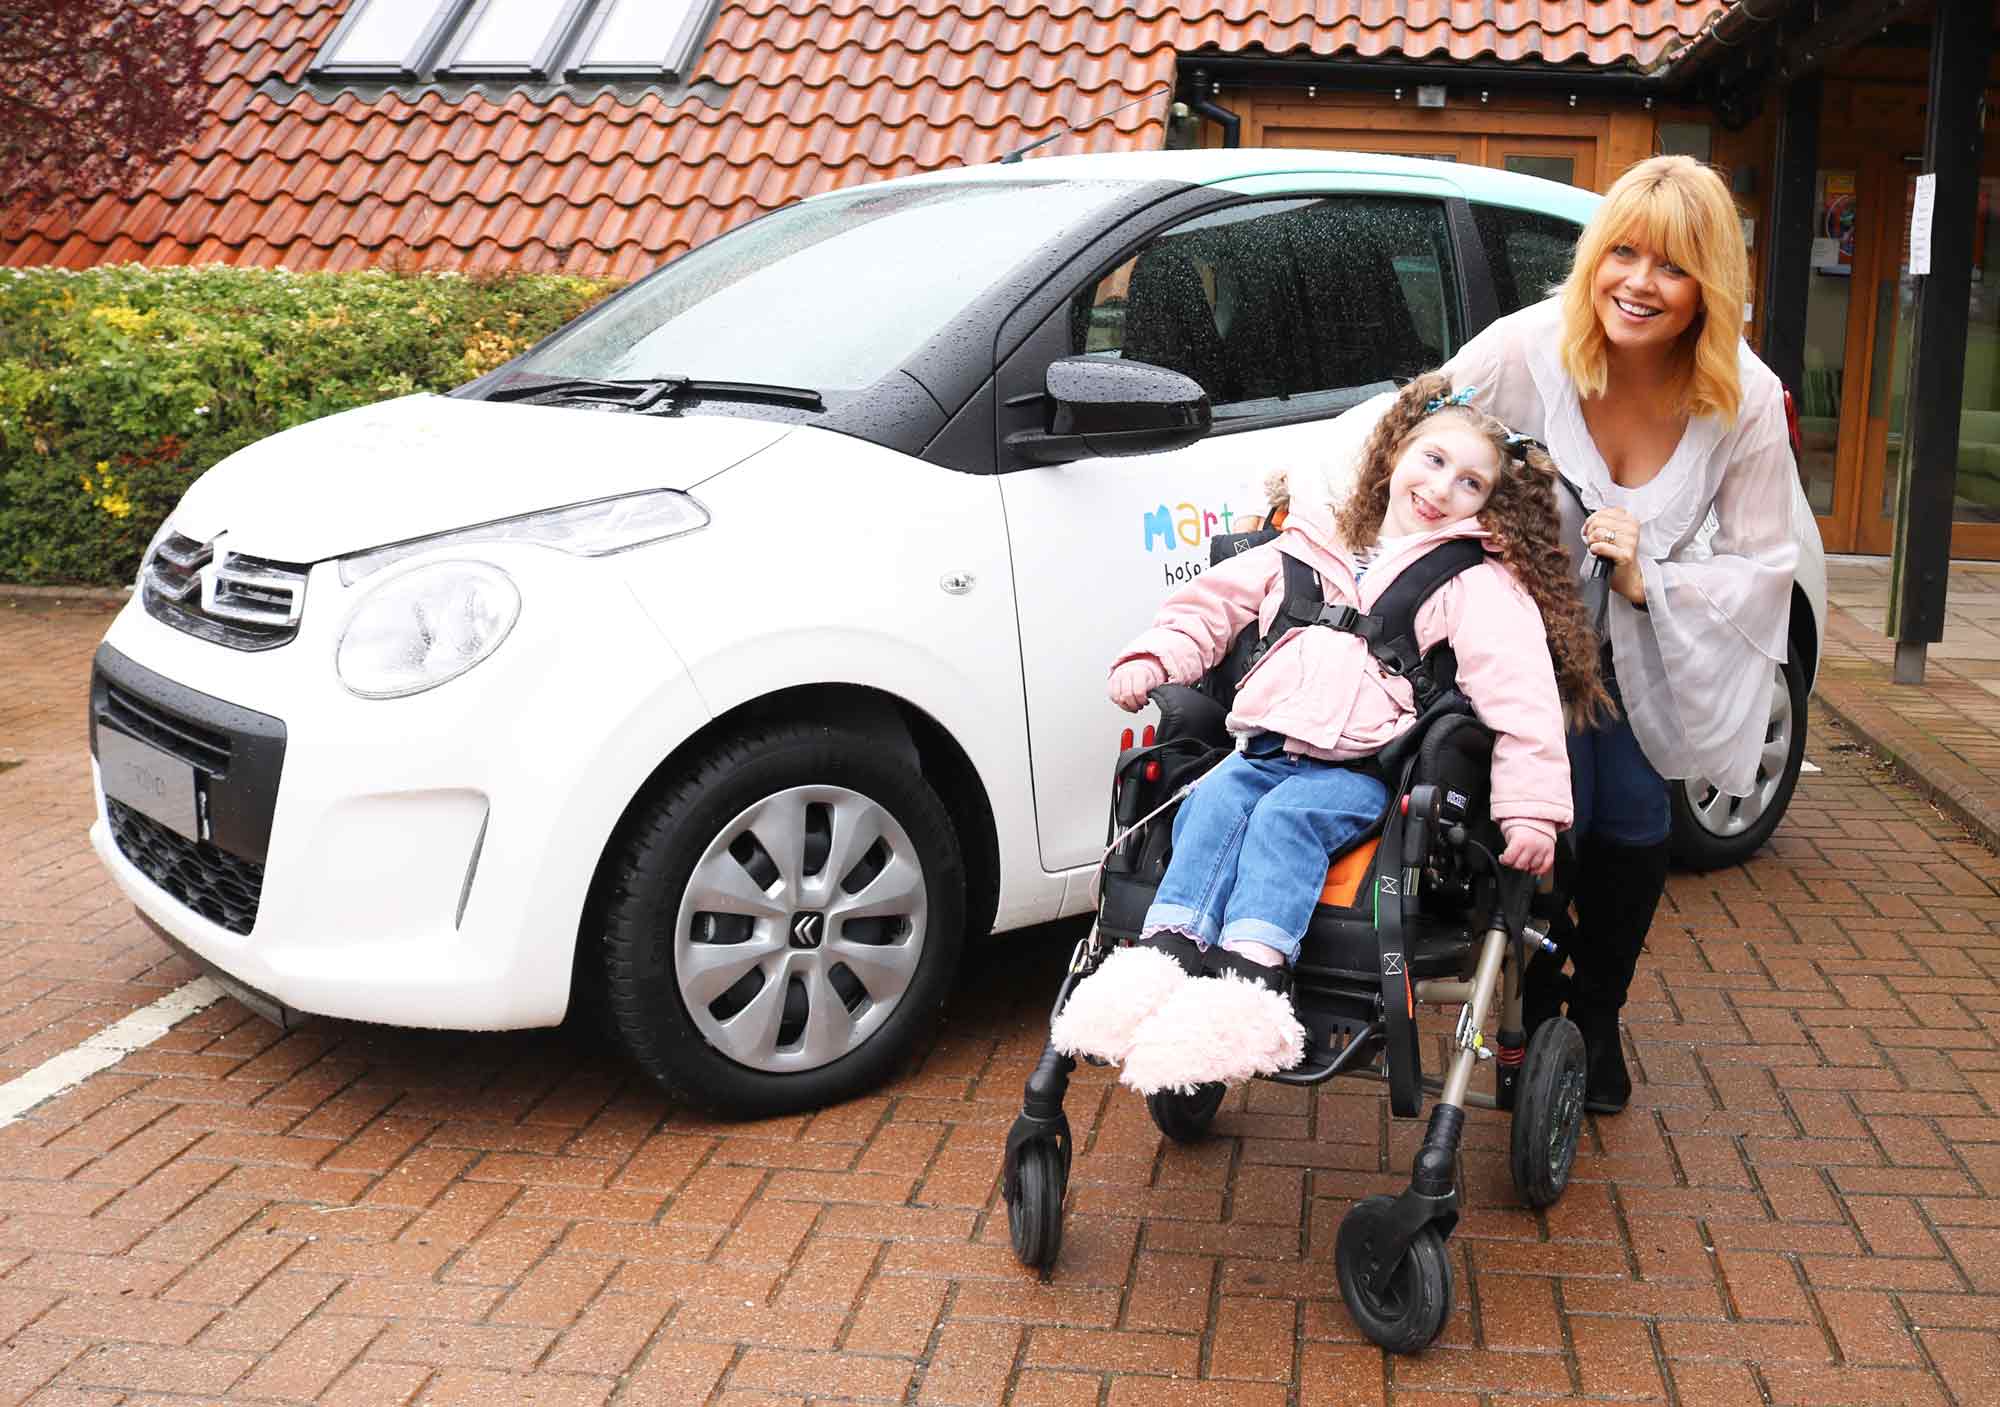 Christine Talbot launches the Martin House Grand Car Raffle with the help of Lacie-Lea Rennie